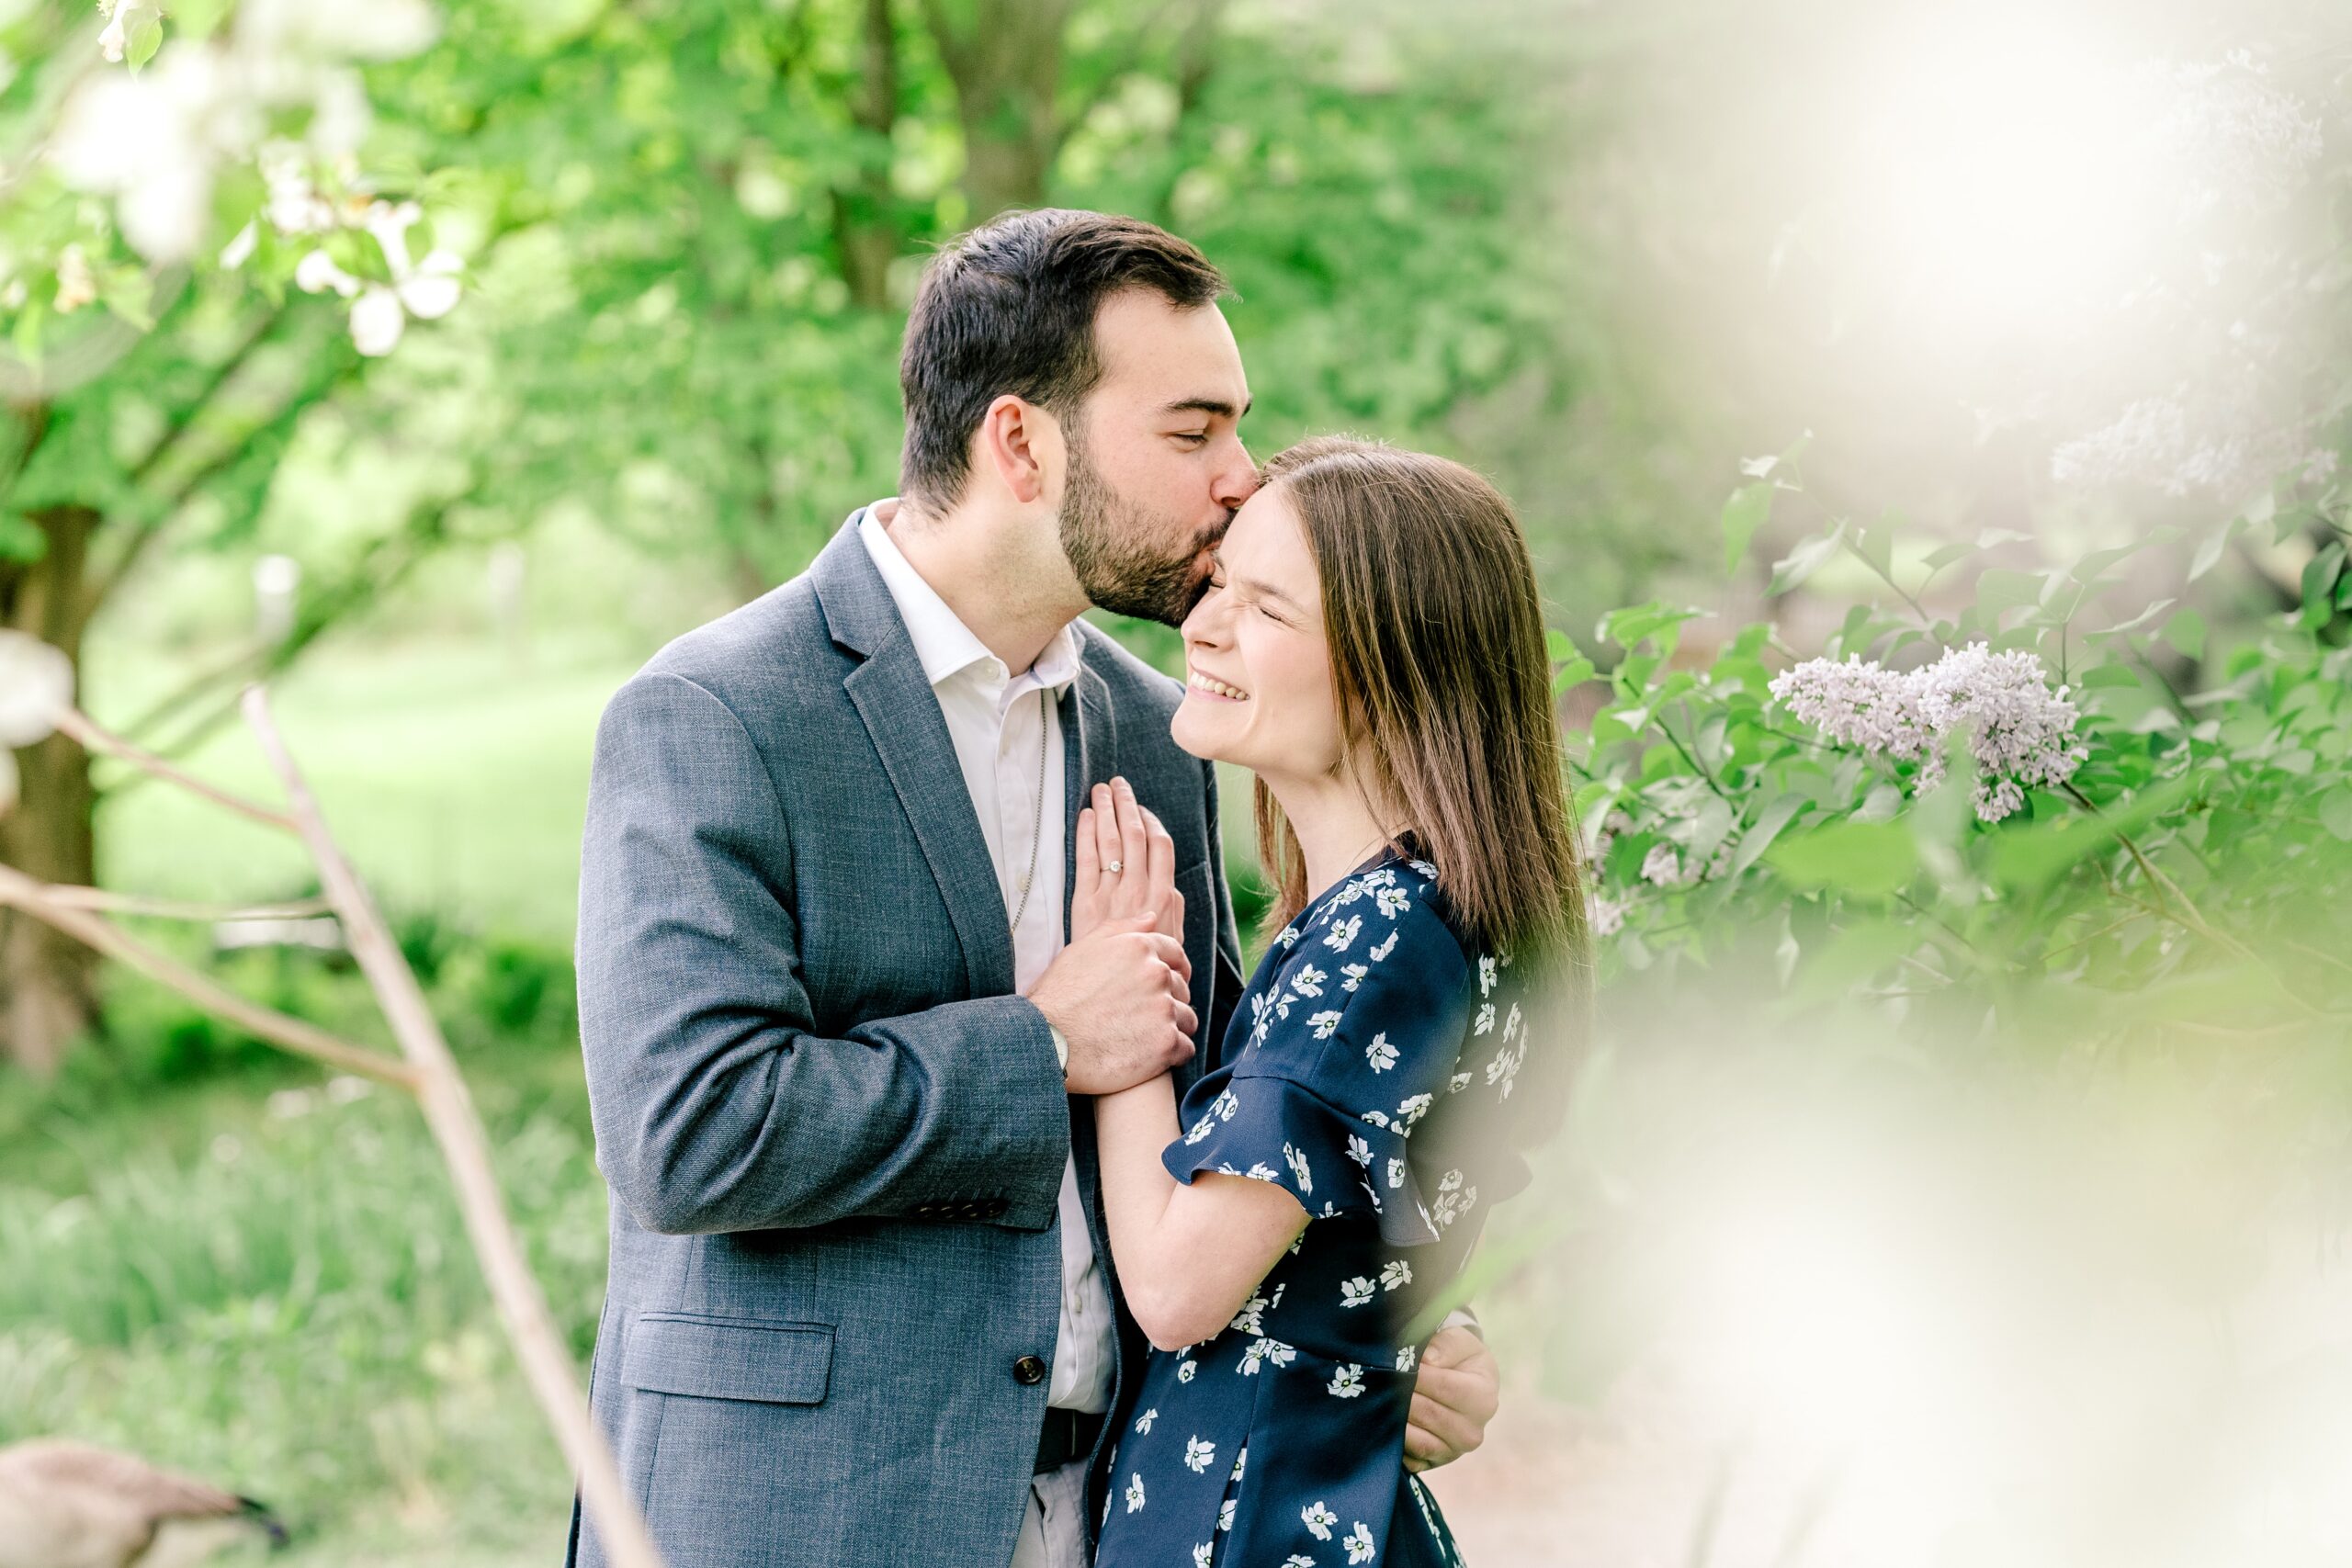 A man kisses his bride-to-be as she smiles during their Meadowlark Botanical Gardens engagement session